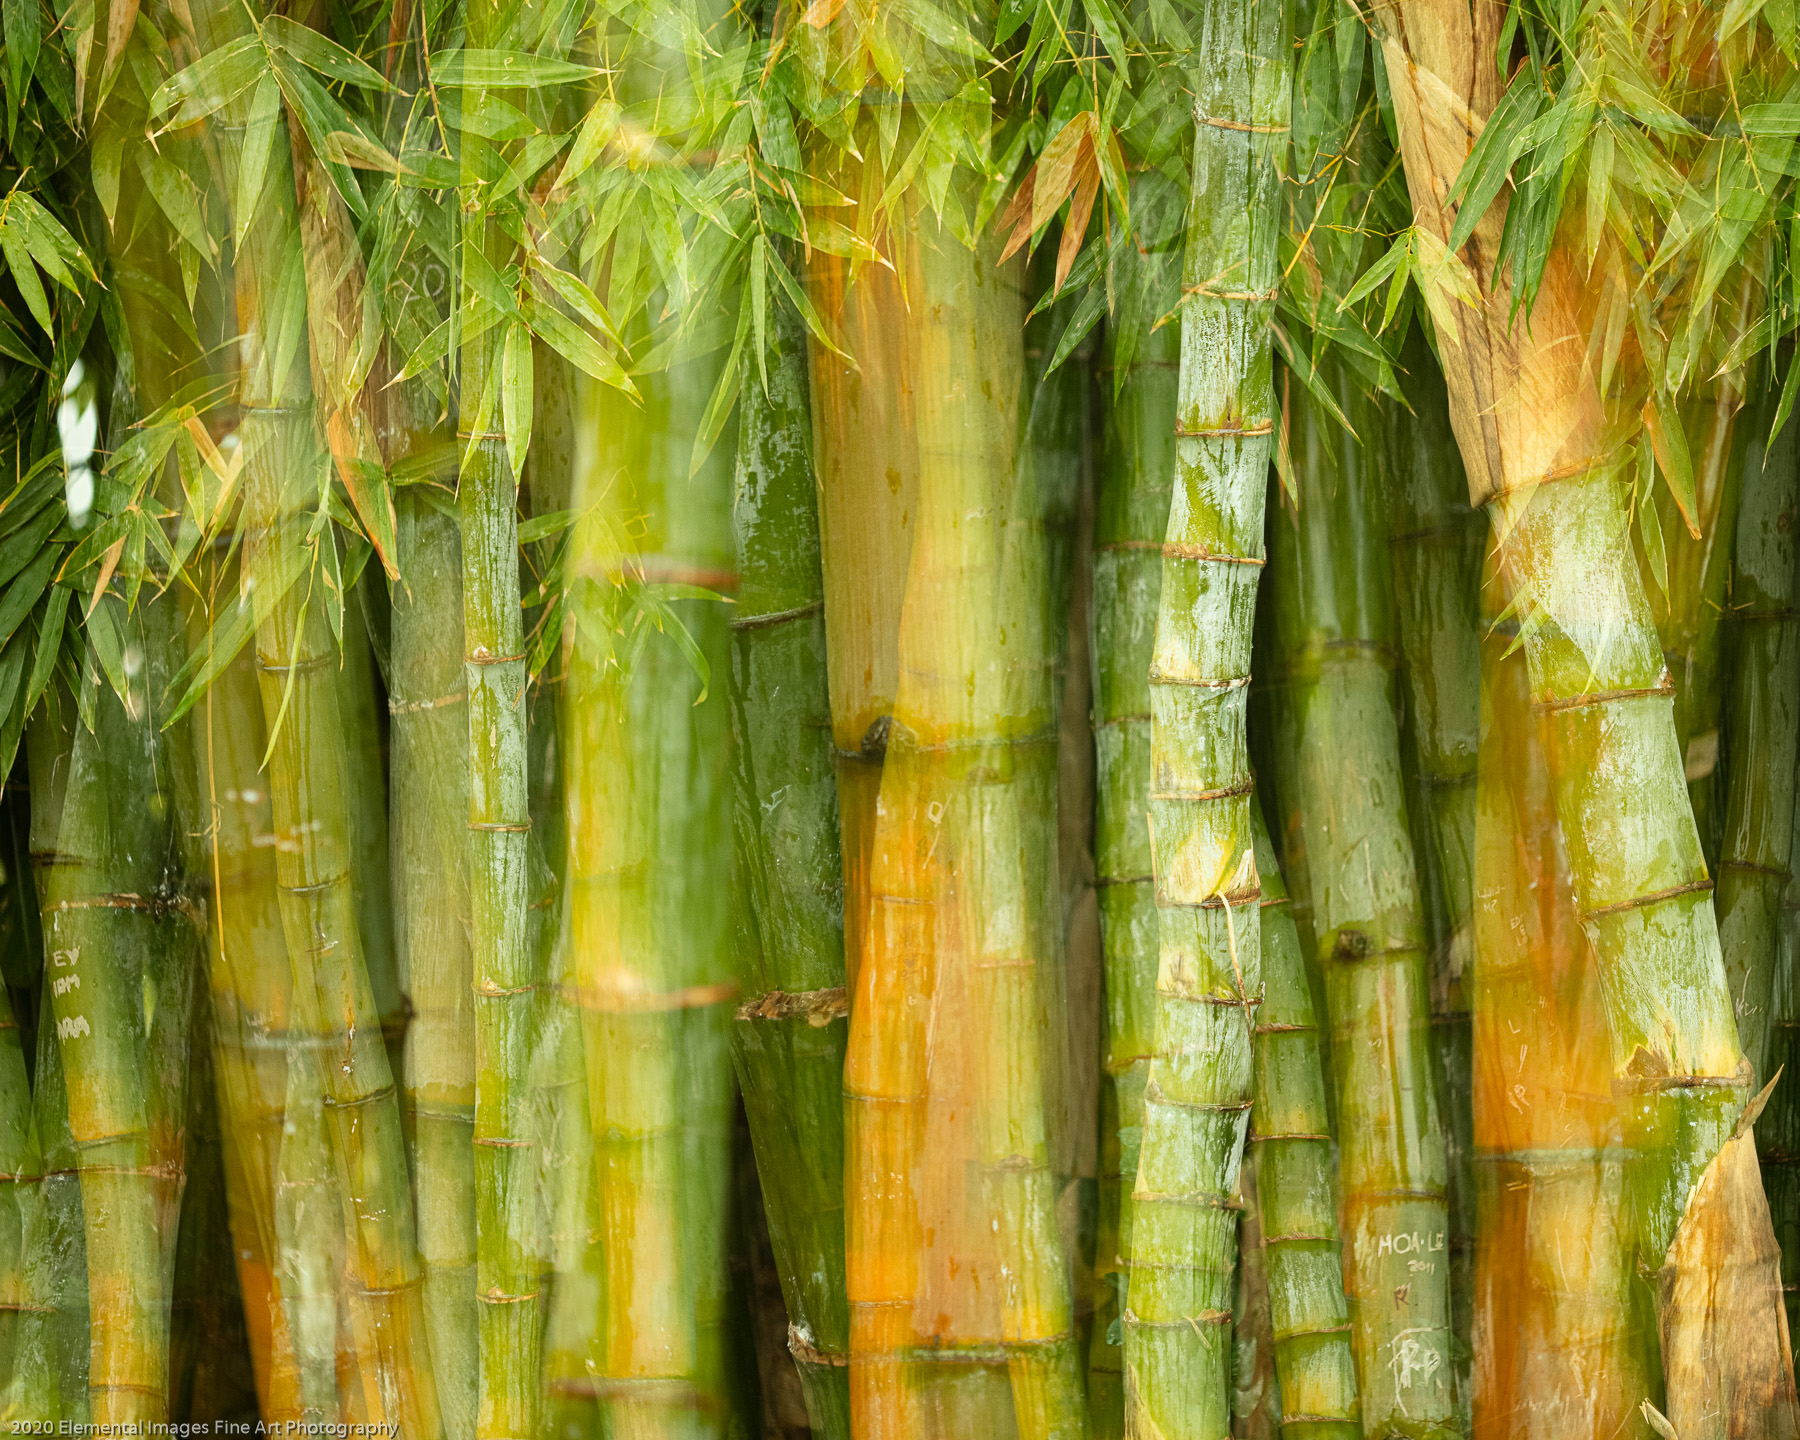 Bamboo Cluster | San Marino | CA |  - © 2020 Elemental Images Fine Art Photography - All Rights Reserved Worldwide